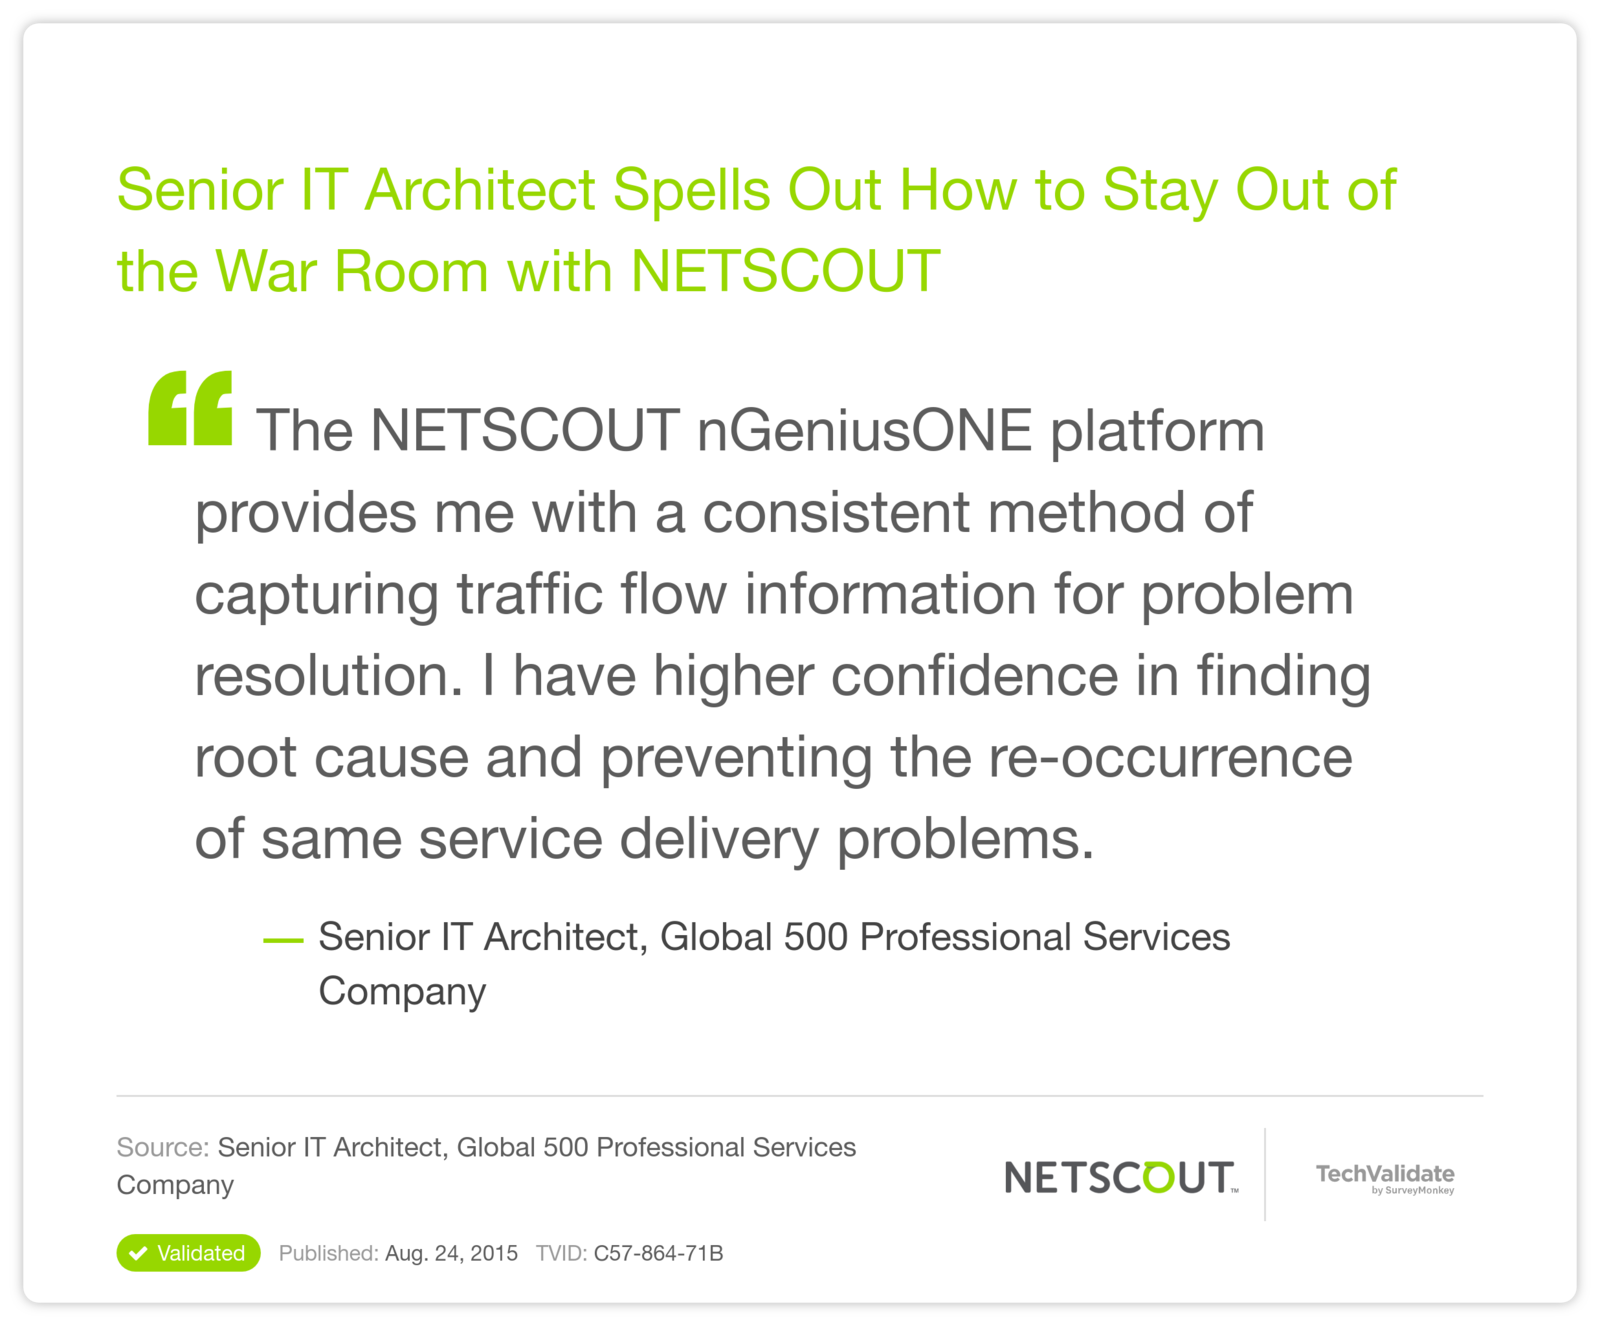 Senior IT Architect Spells Out How to Stay Out of the War Room with NETSCOUT